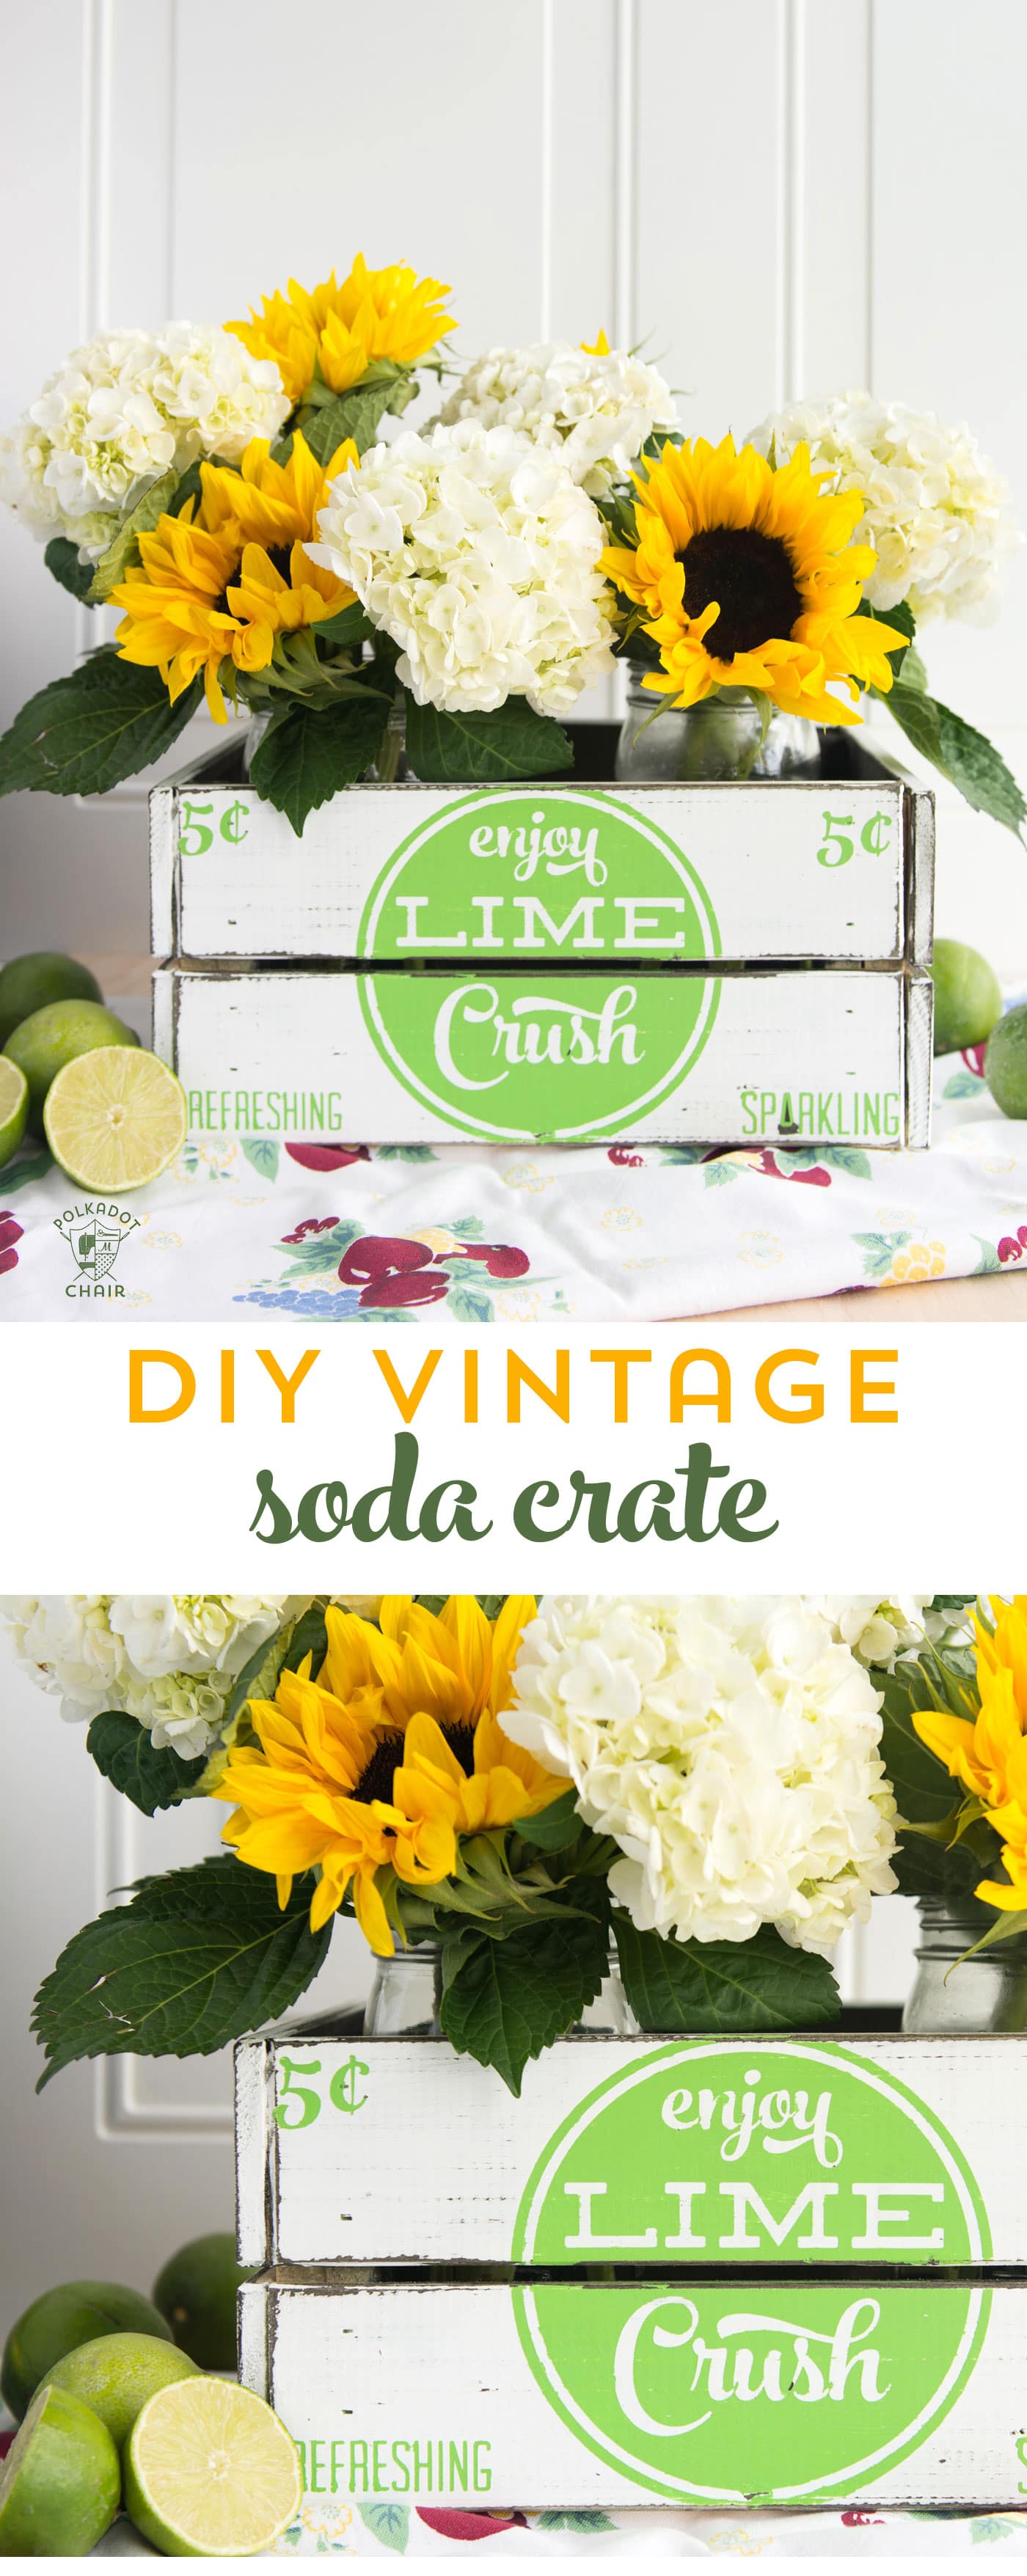 learn how to make your own hand painted vintage soda crate using a stencil. Such a cute project for summer, love the vintage farmhouse style of this crate!